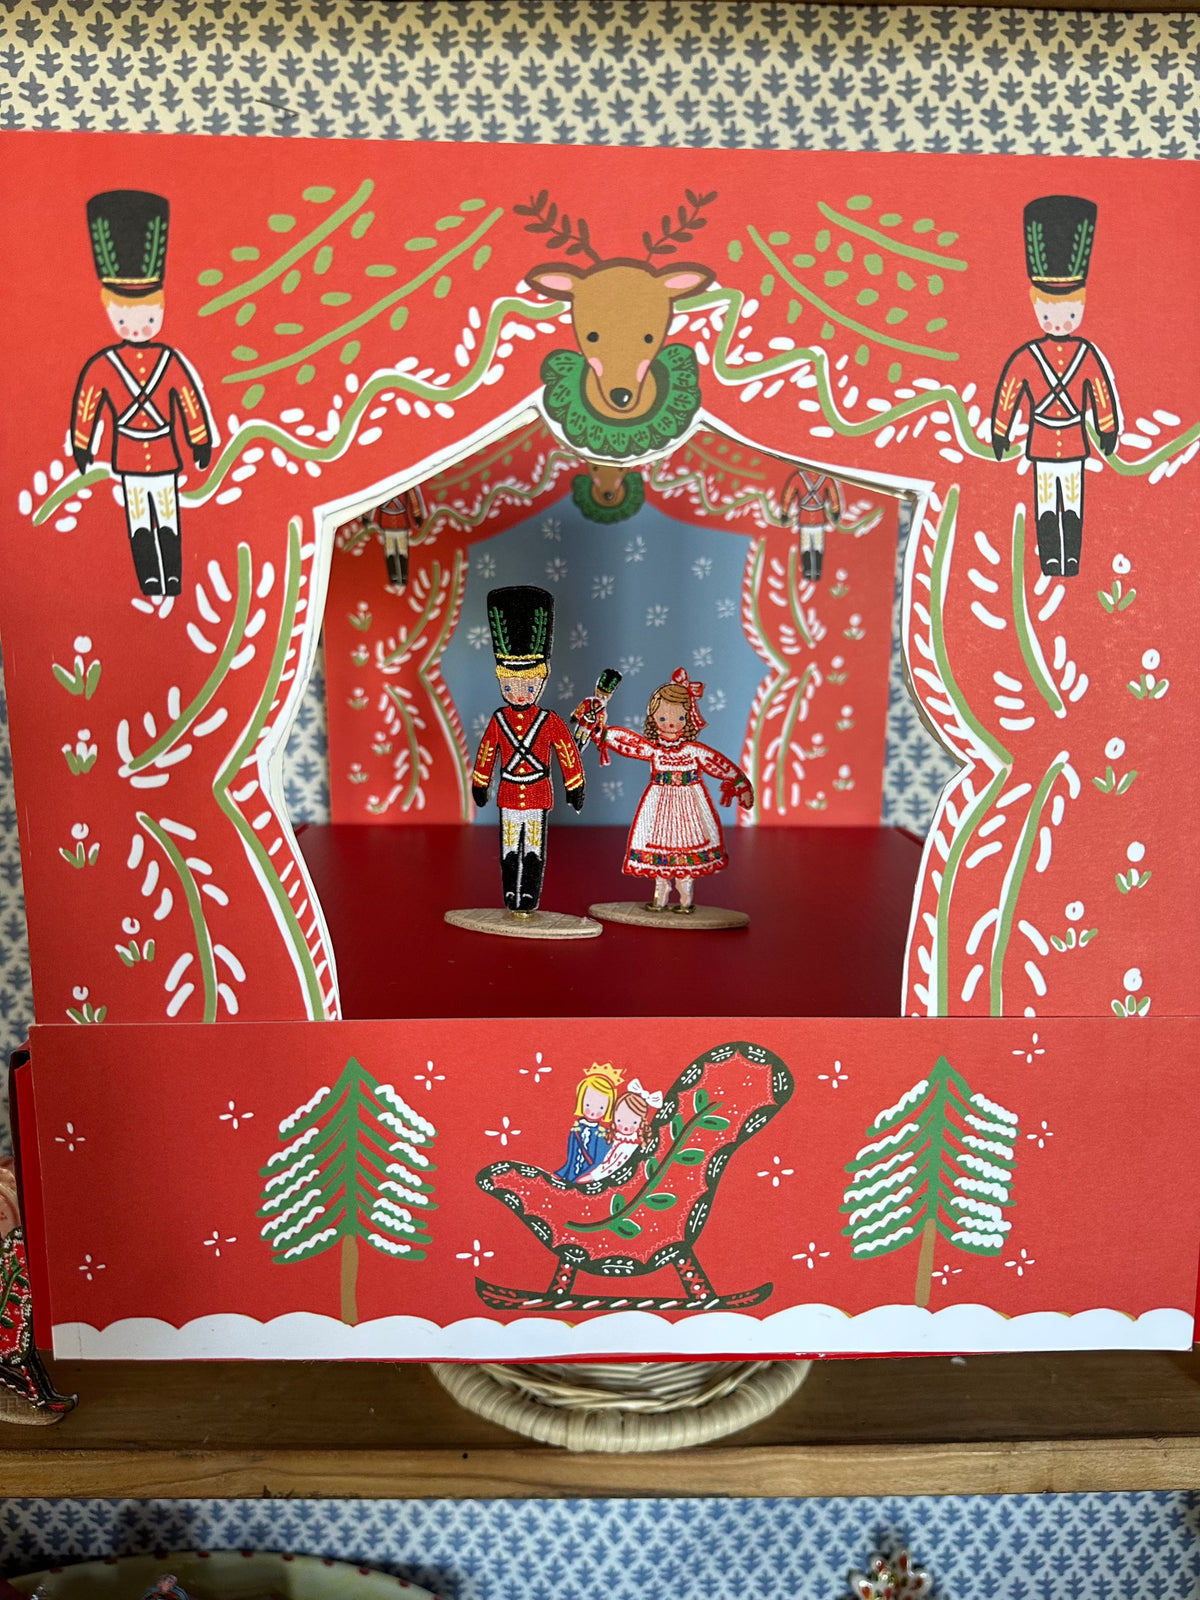 Nutcracker Embroidered Characters + Stage - Premium  from Tricia Lowenfield Design 